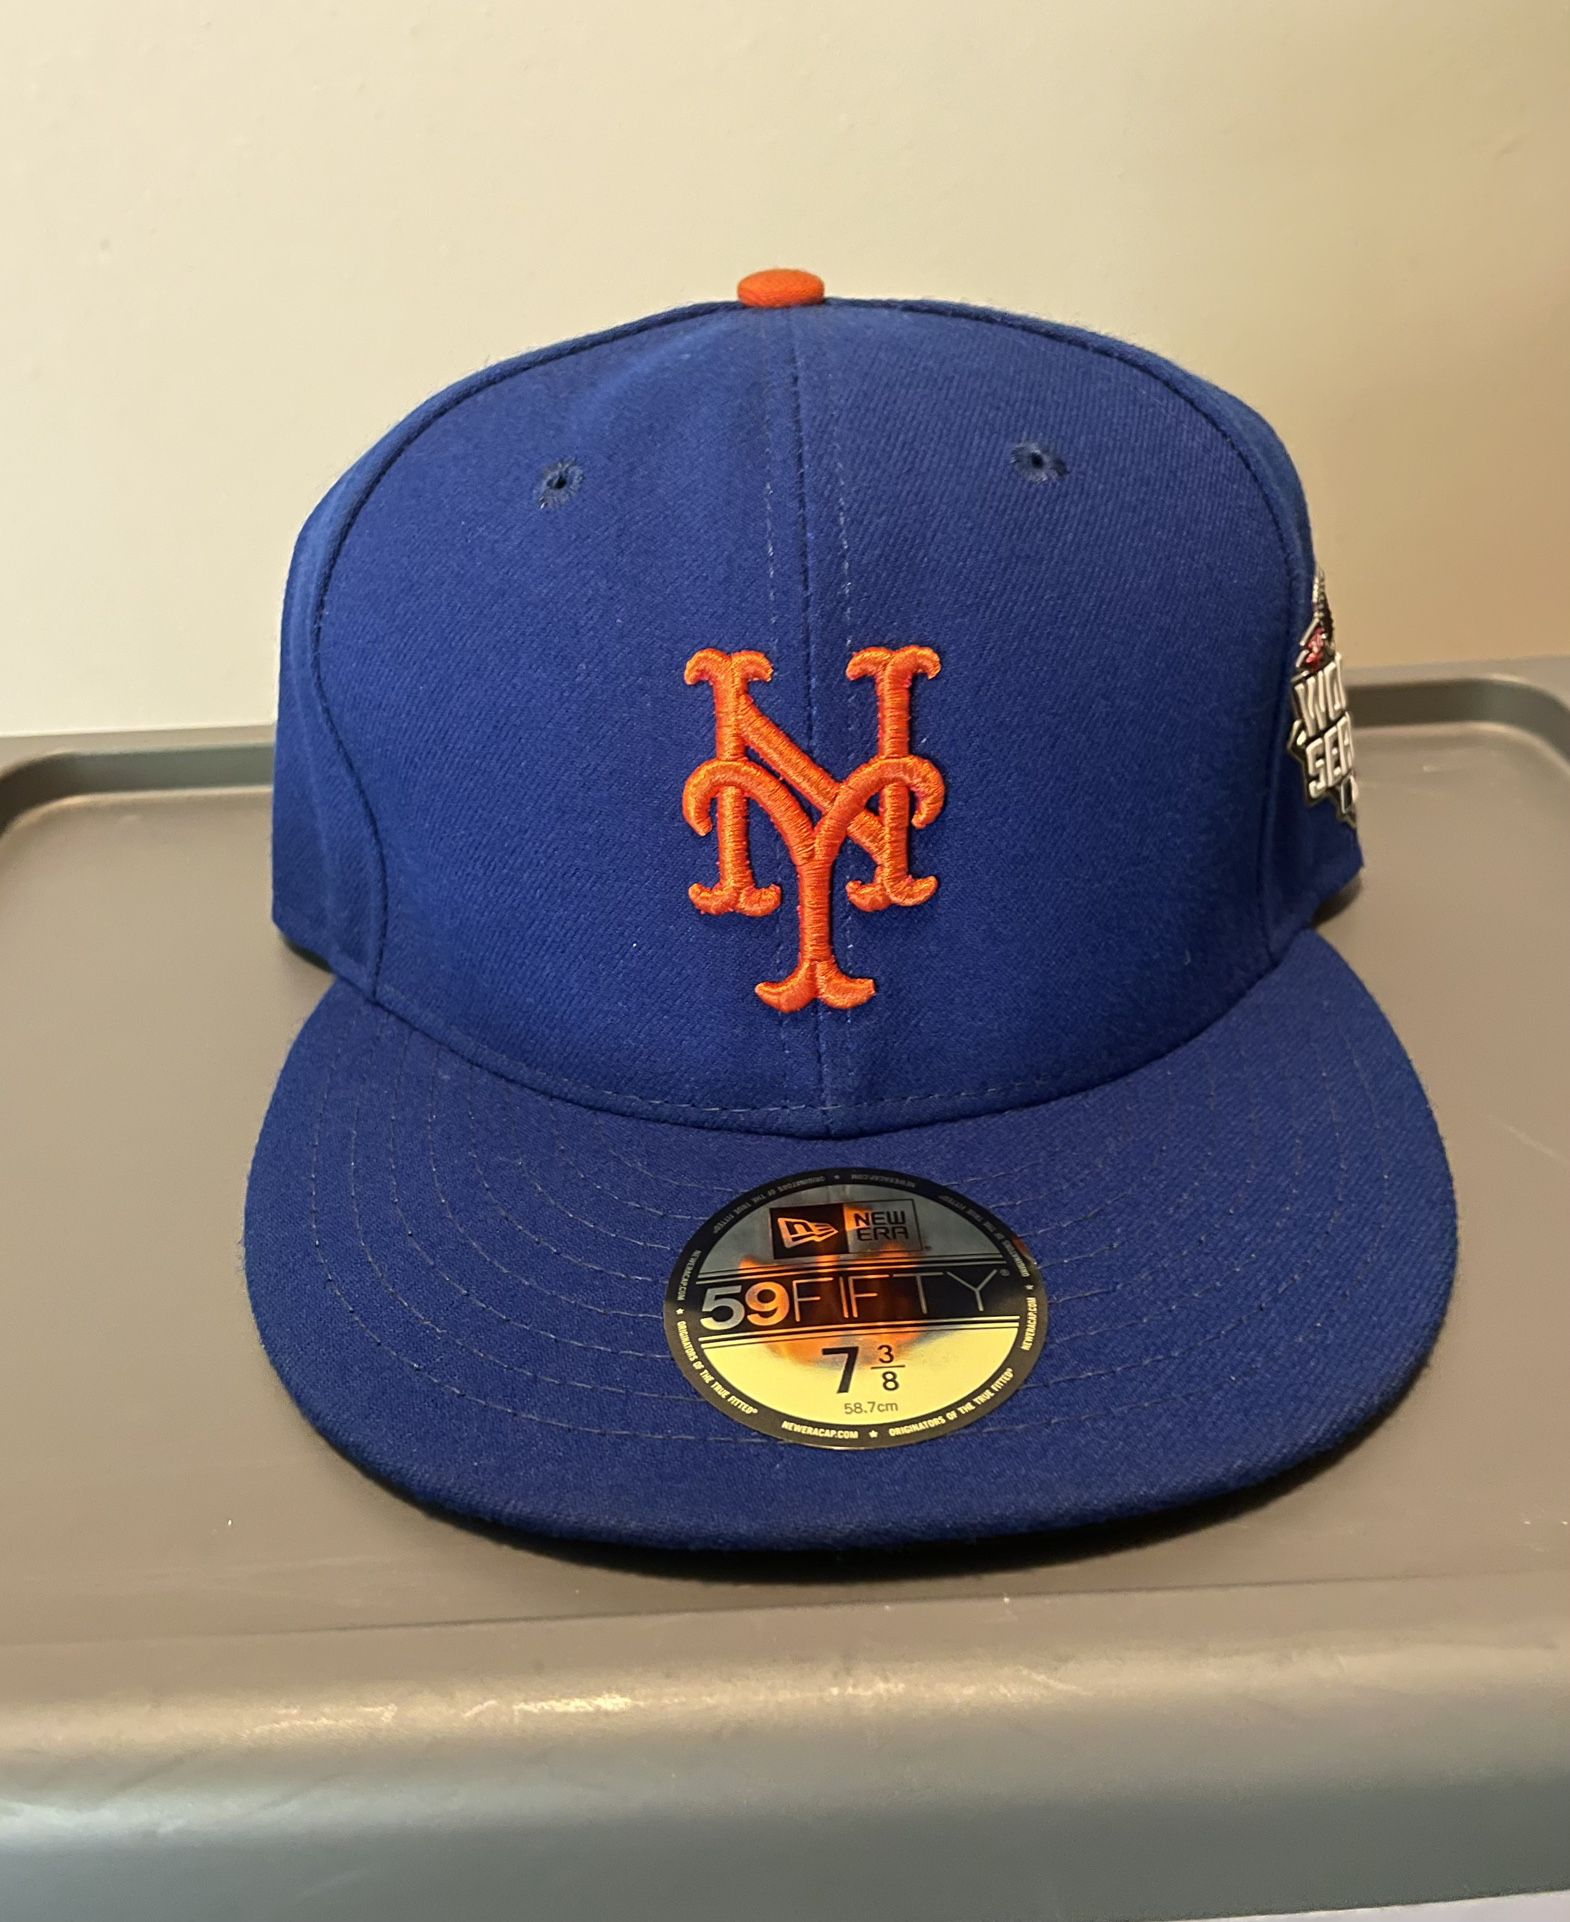 Mets USA fitted cap size 8